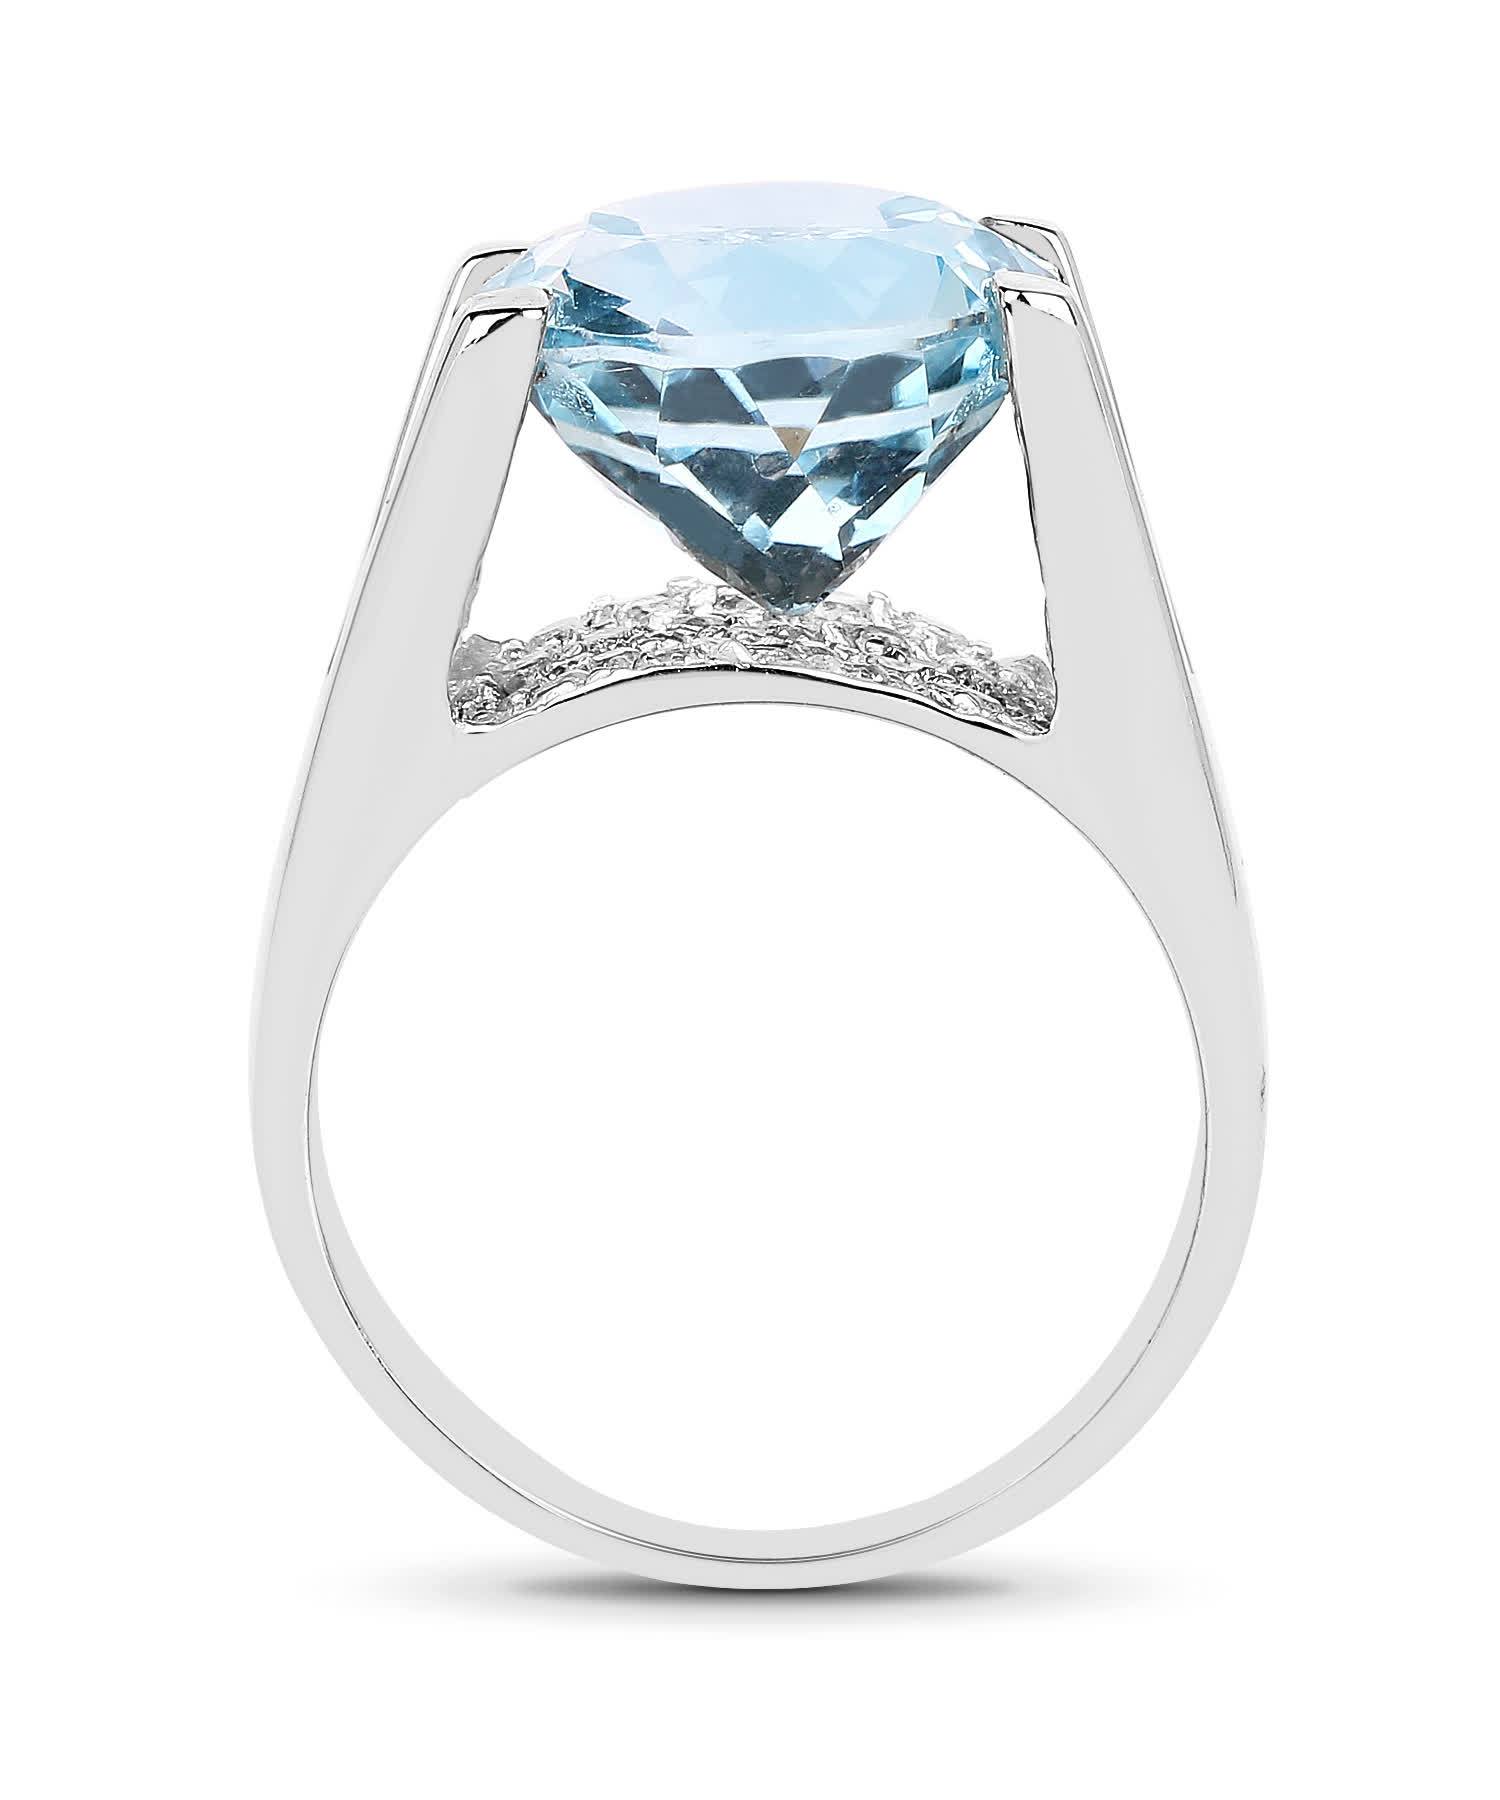 7.21ctw Natural Sky Blue Topaz and Brilliant Cut Cubic Zirconia Rhodium Plated 925 Sterling Silver Cocktail Ring View 2